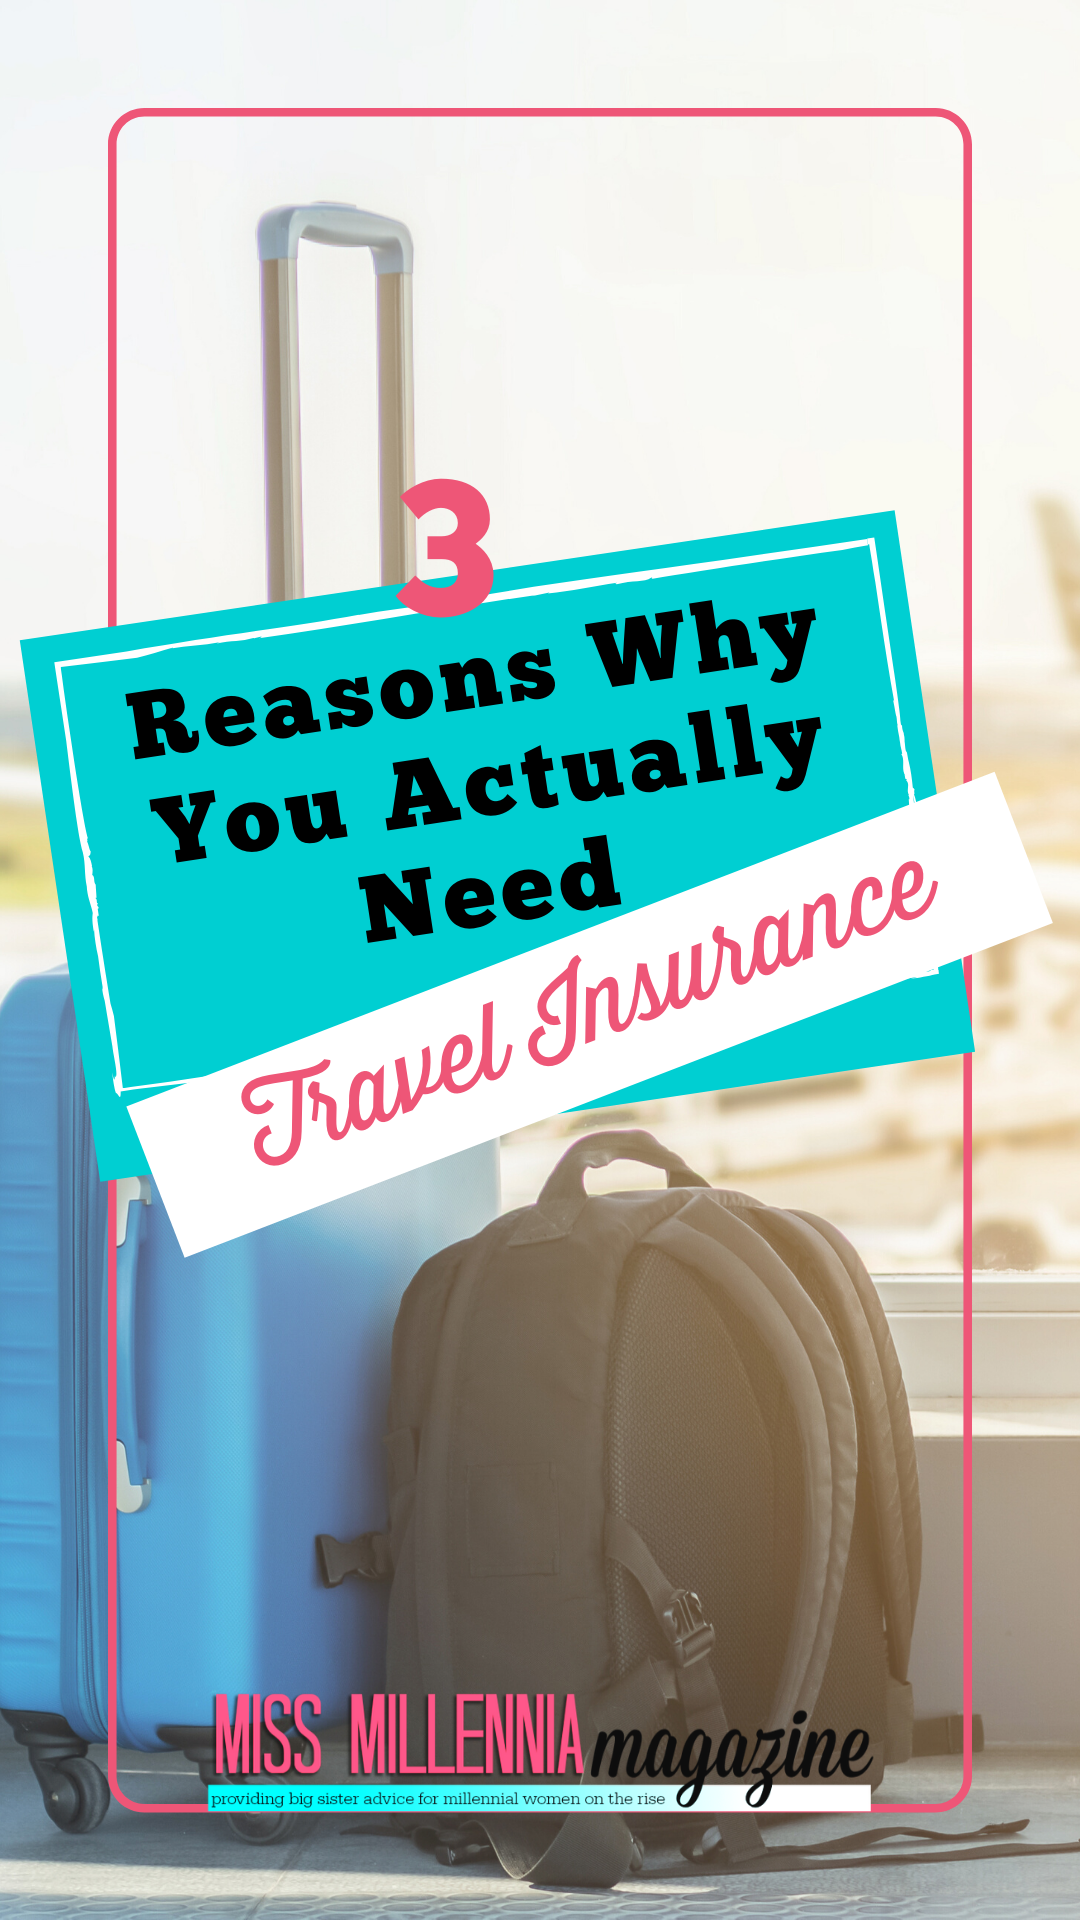 3 Reasons Why You Actually Need Travel Insurance